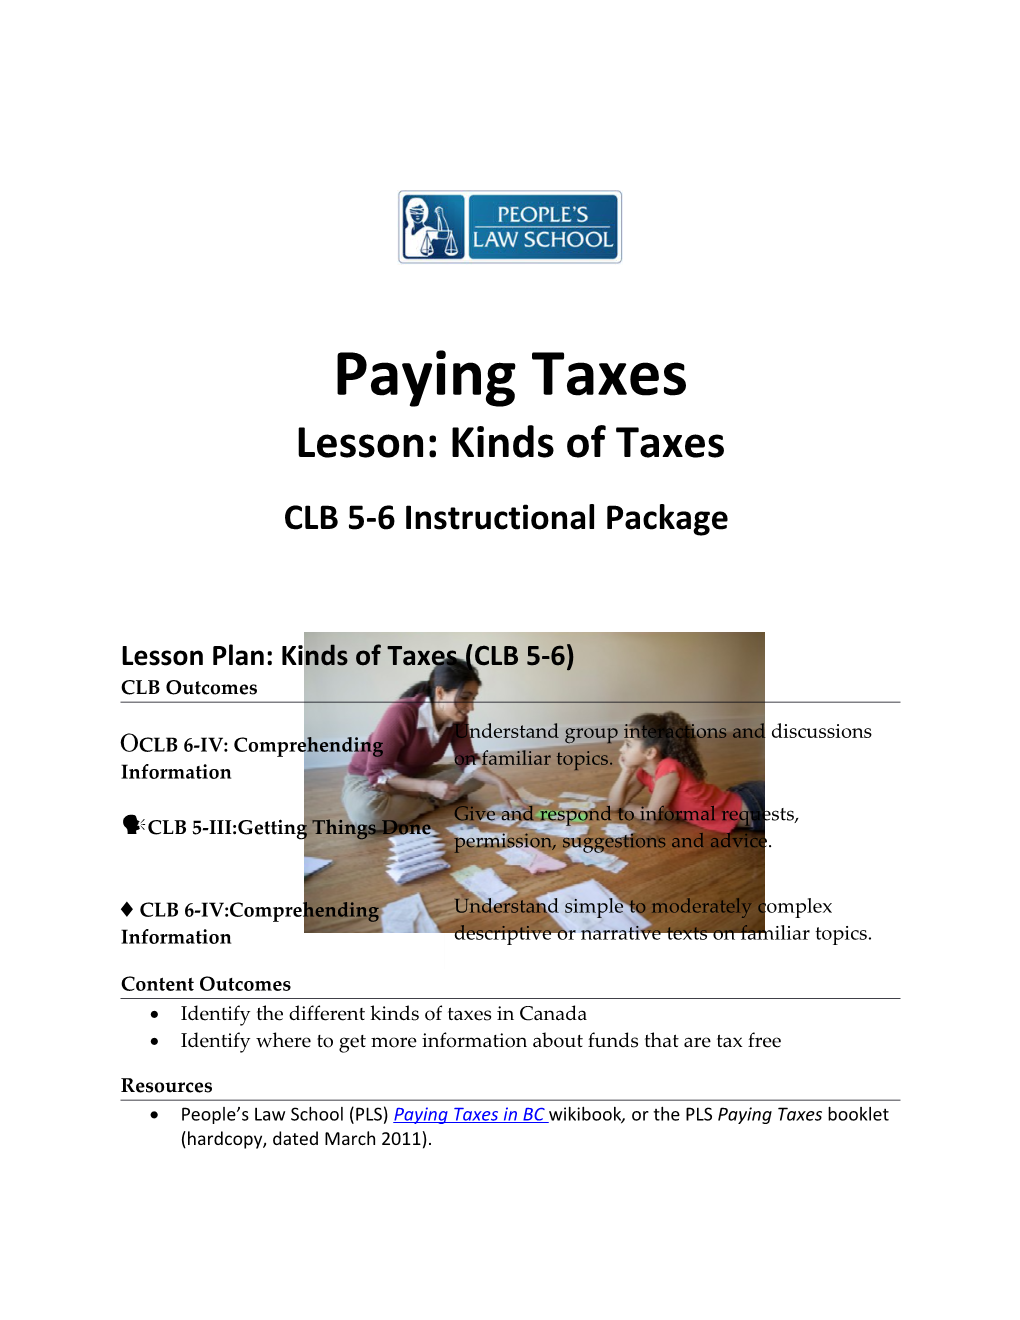 Lesson: Kinds of Taxes